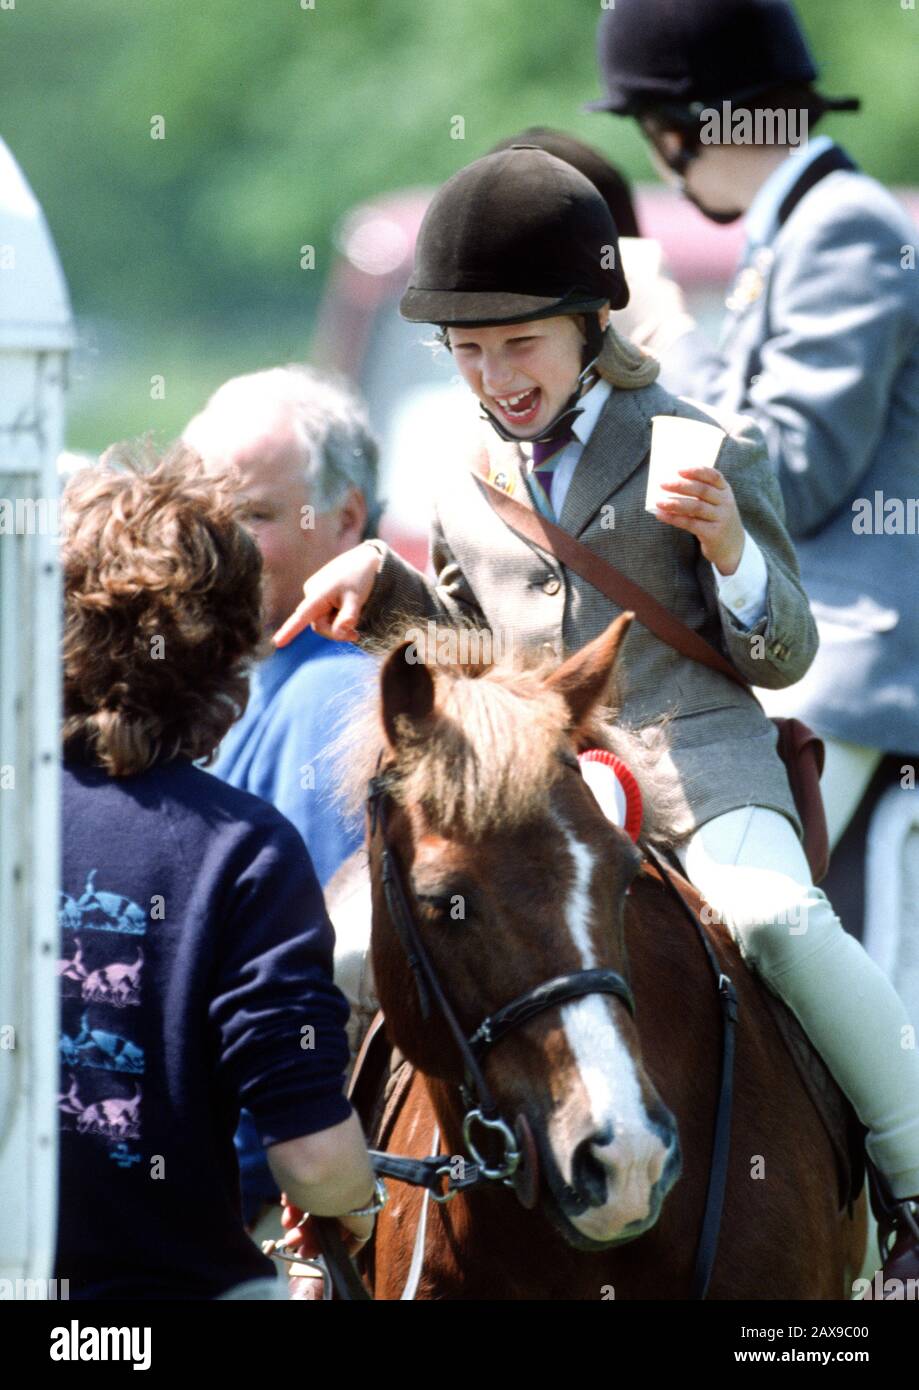 Zara Phillips competing in horse trials, Windsor Great Park, Windsor, England May 1988 Stock Photo